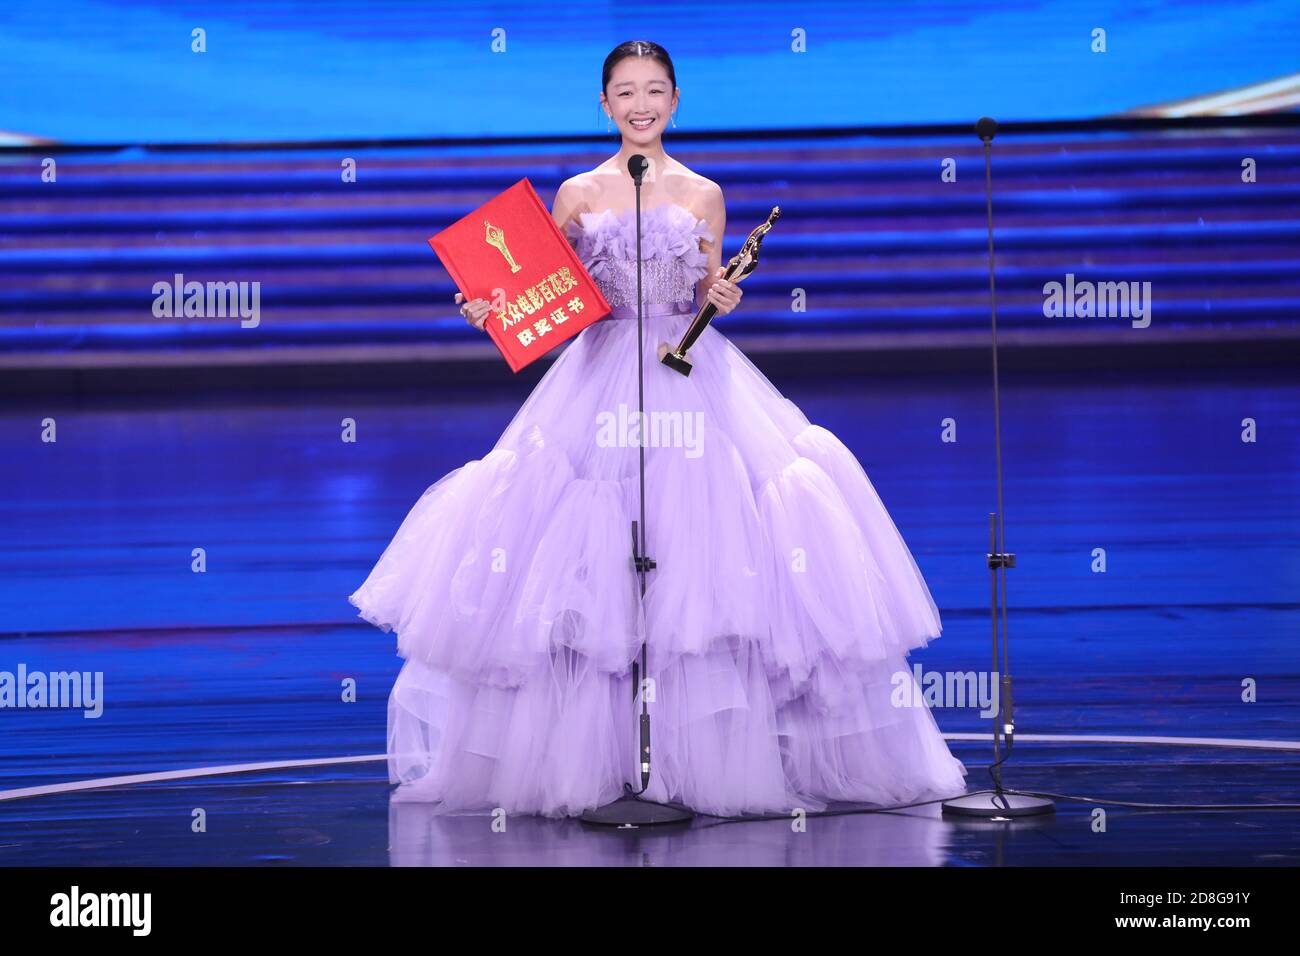 Zhou Dongyu wins Best Actress at Golden Rooster Awards